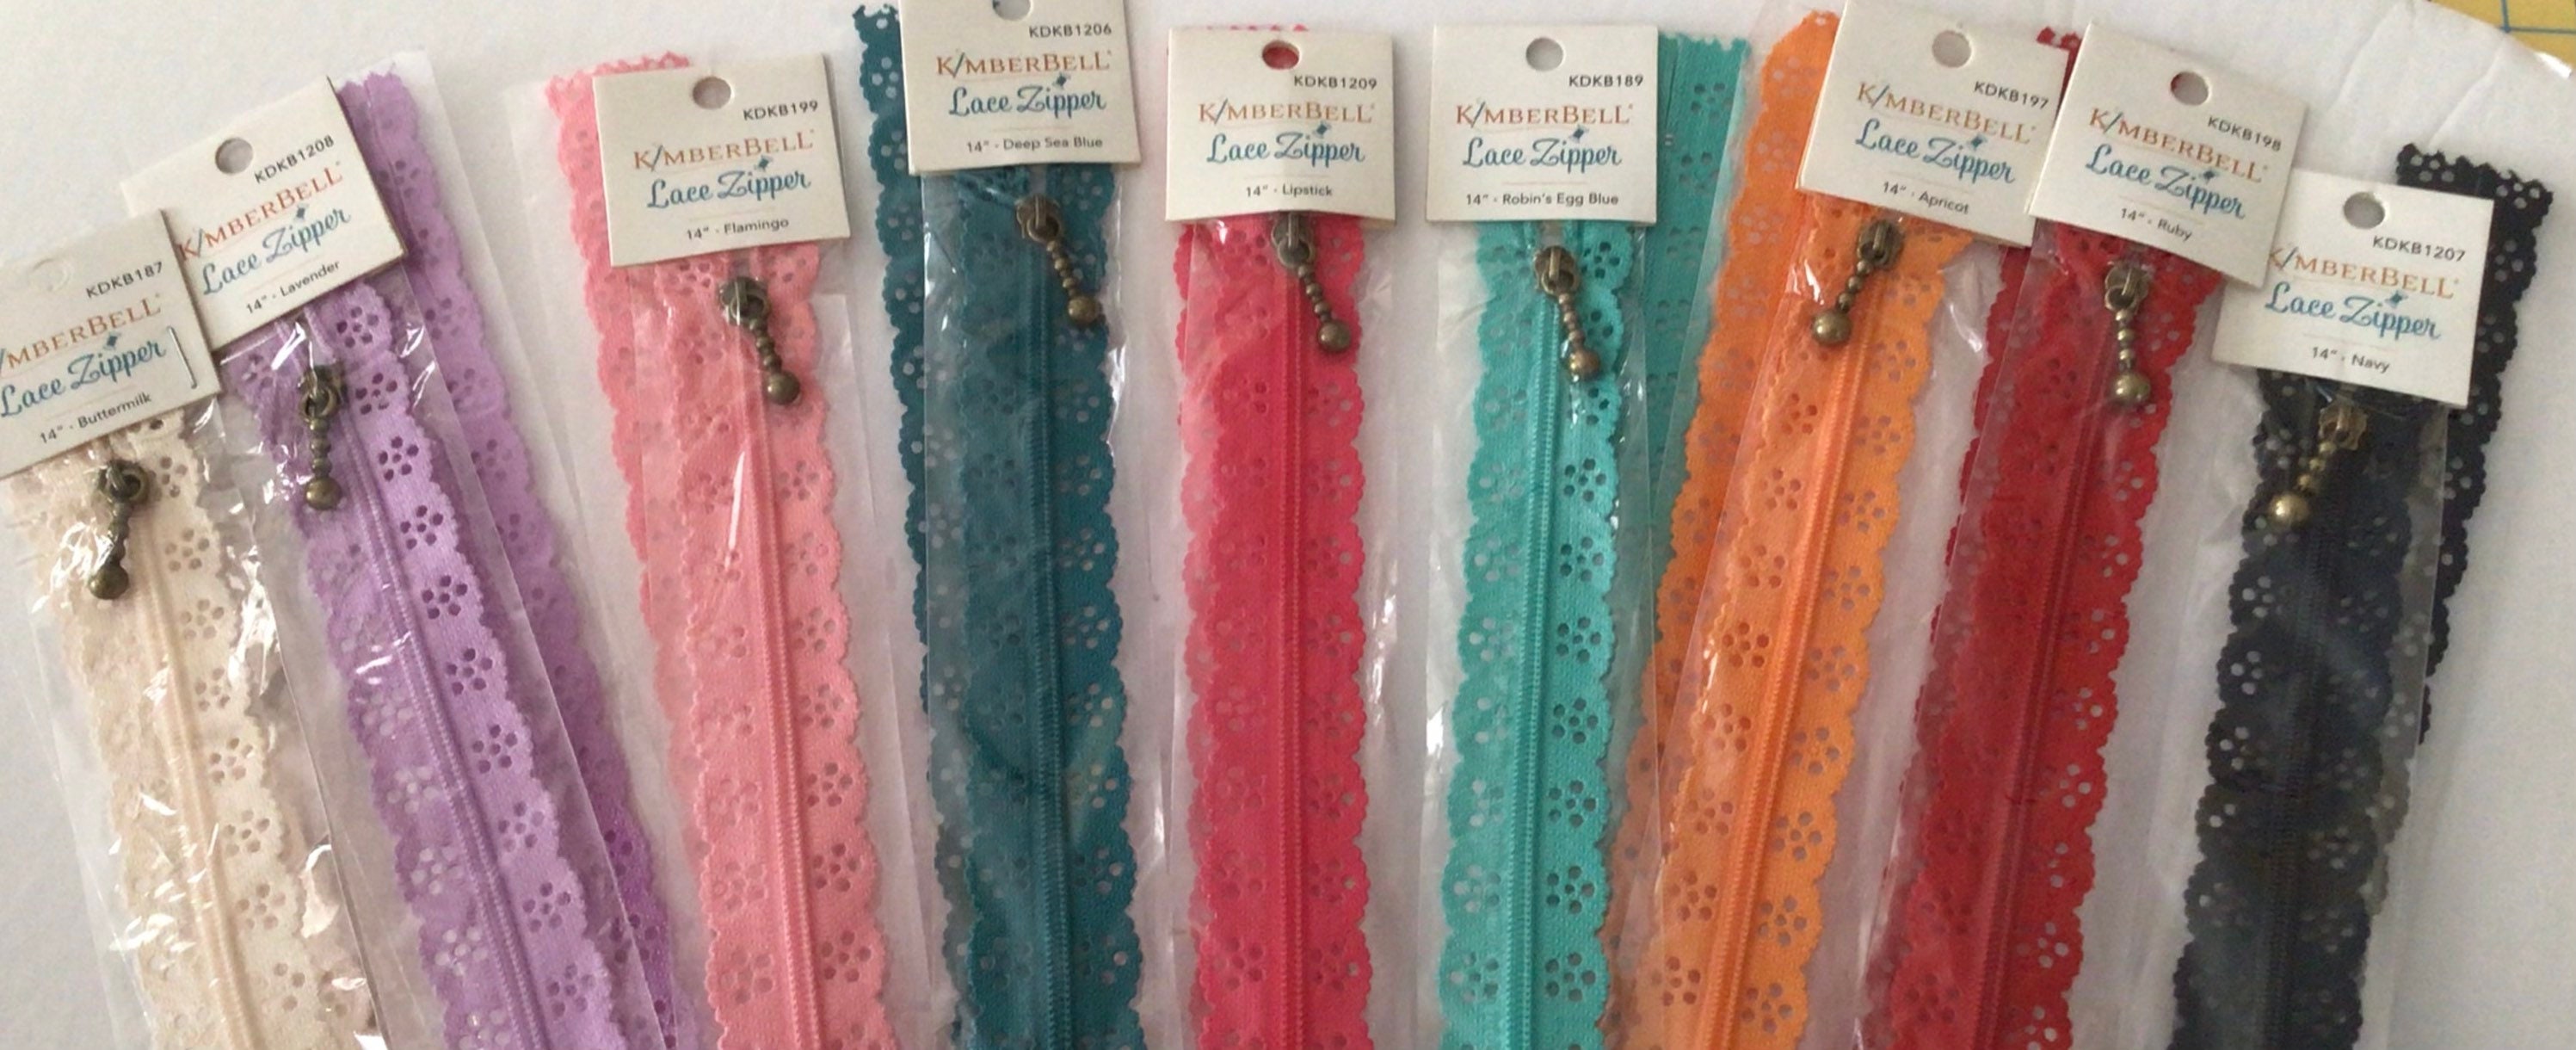  Mandala Crafts Lace Zippers 16 Inch Fancy Zippers for Bags and  Purses - Novelty Zippers Exposed Zippers with Lace - 20 Lacy Flower  Decorative Zippers for Sewing